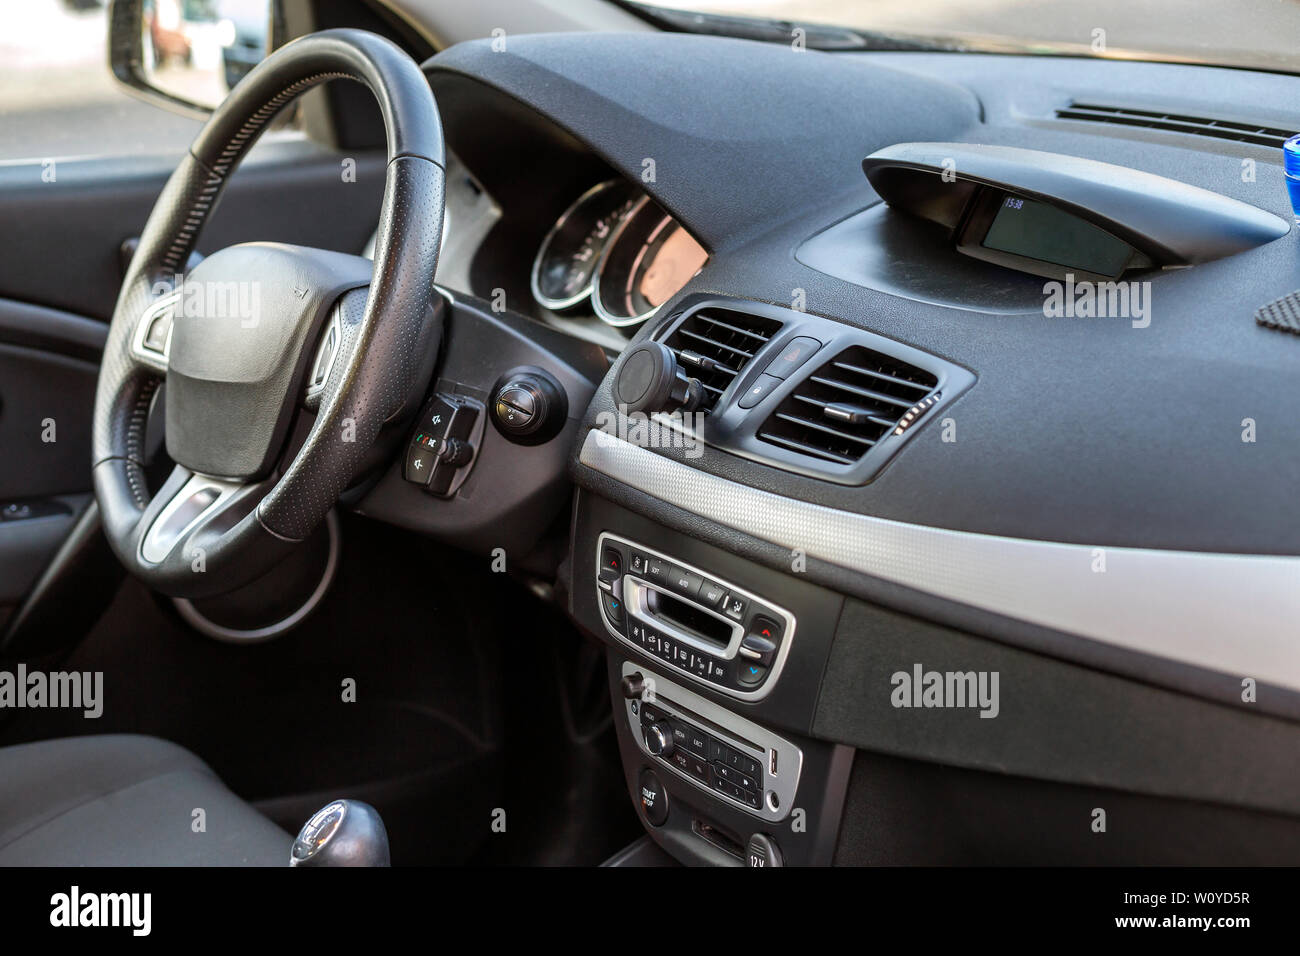 Modern Expensive Car Interior Dashboard And Steering Wheel